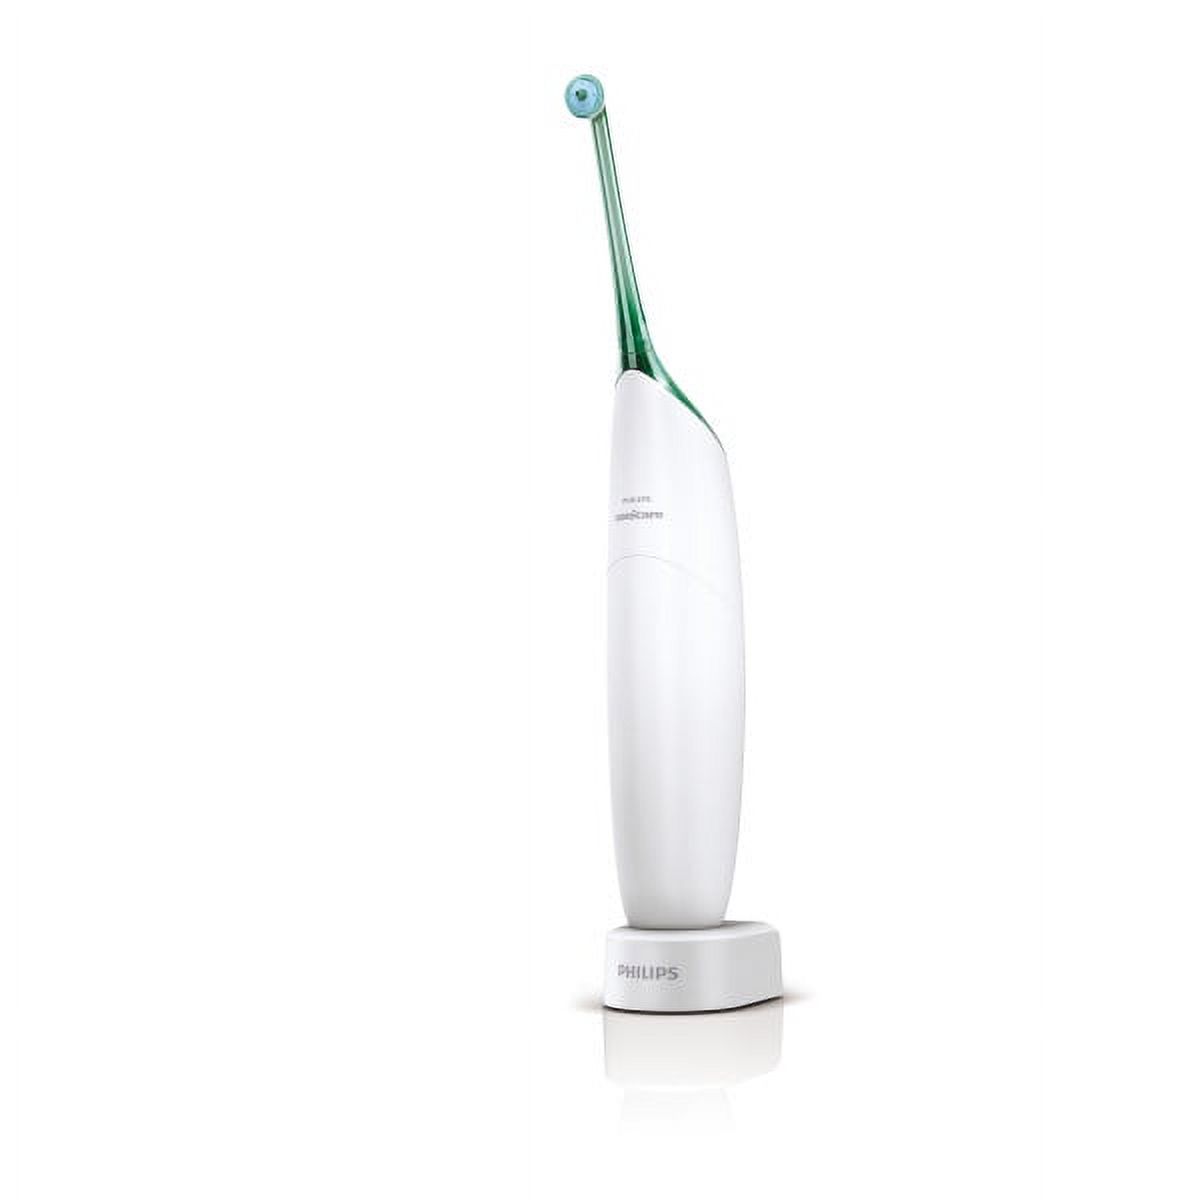 Philips Sonicare AirFloss Rechargeable Electric Flosser, HX8211/03 - image 1 of 11